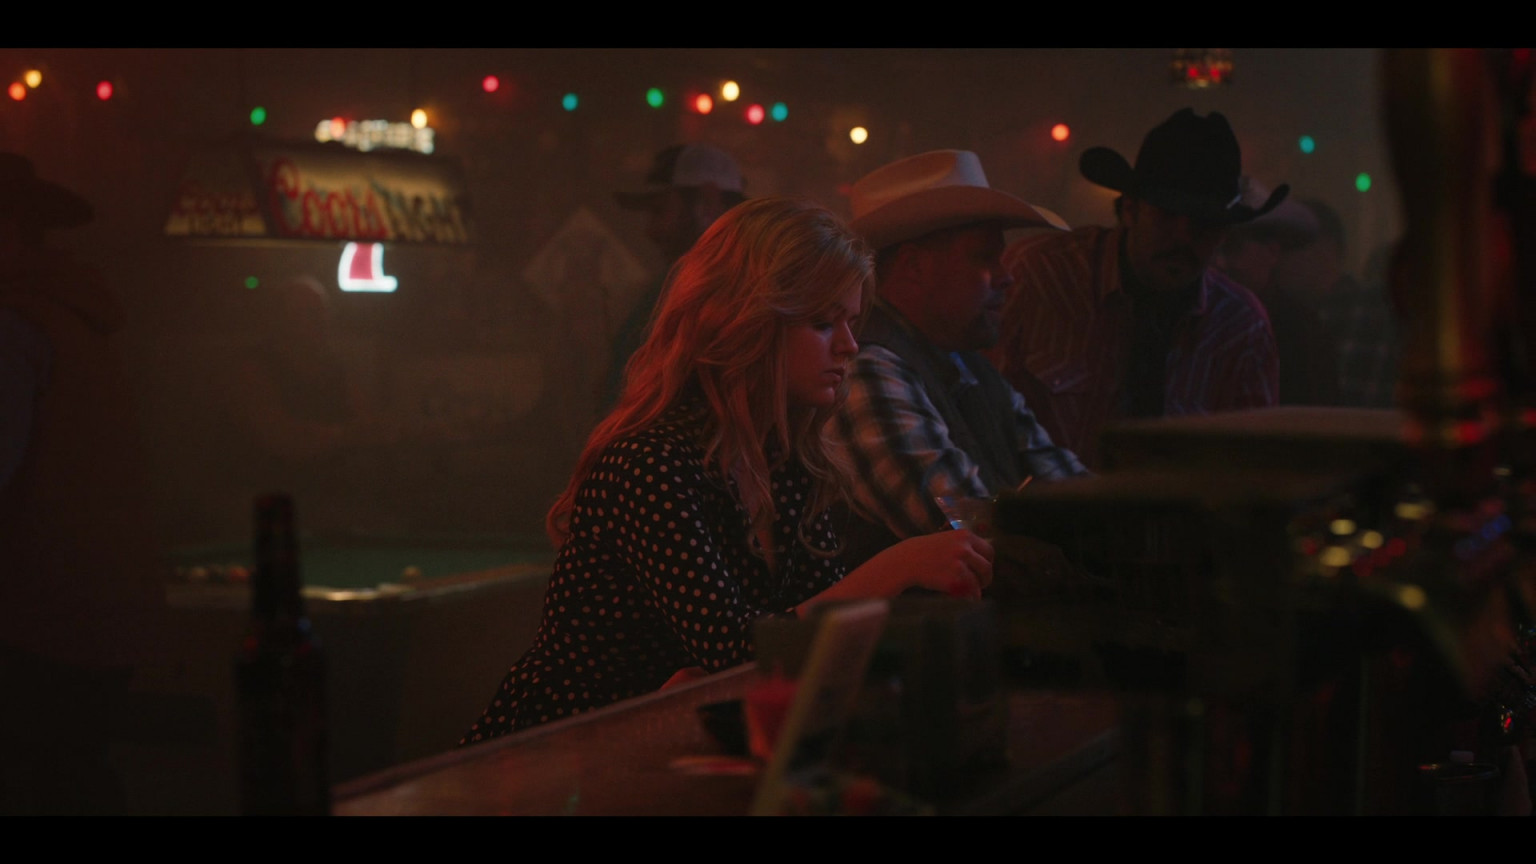 Coors Light Sign And Pool Table Lights In Yellowstone S05E01 